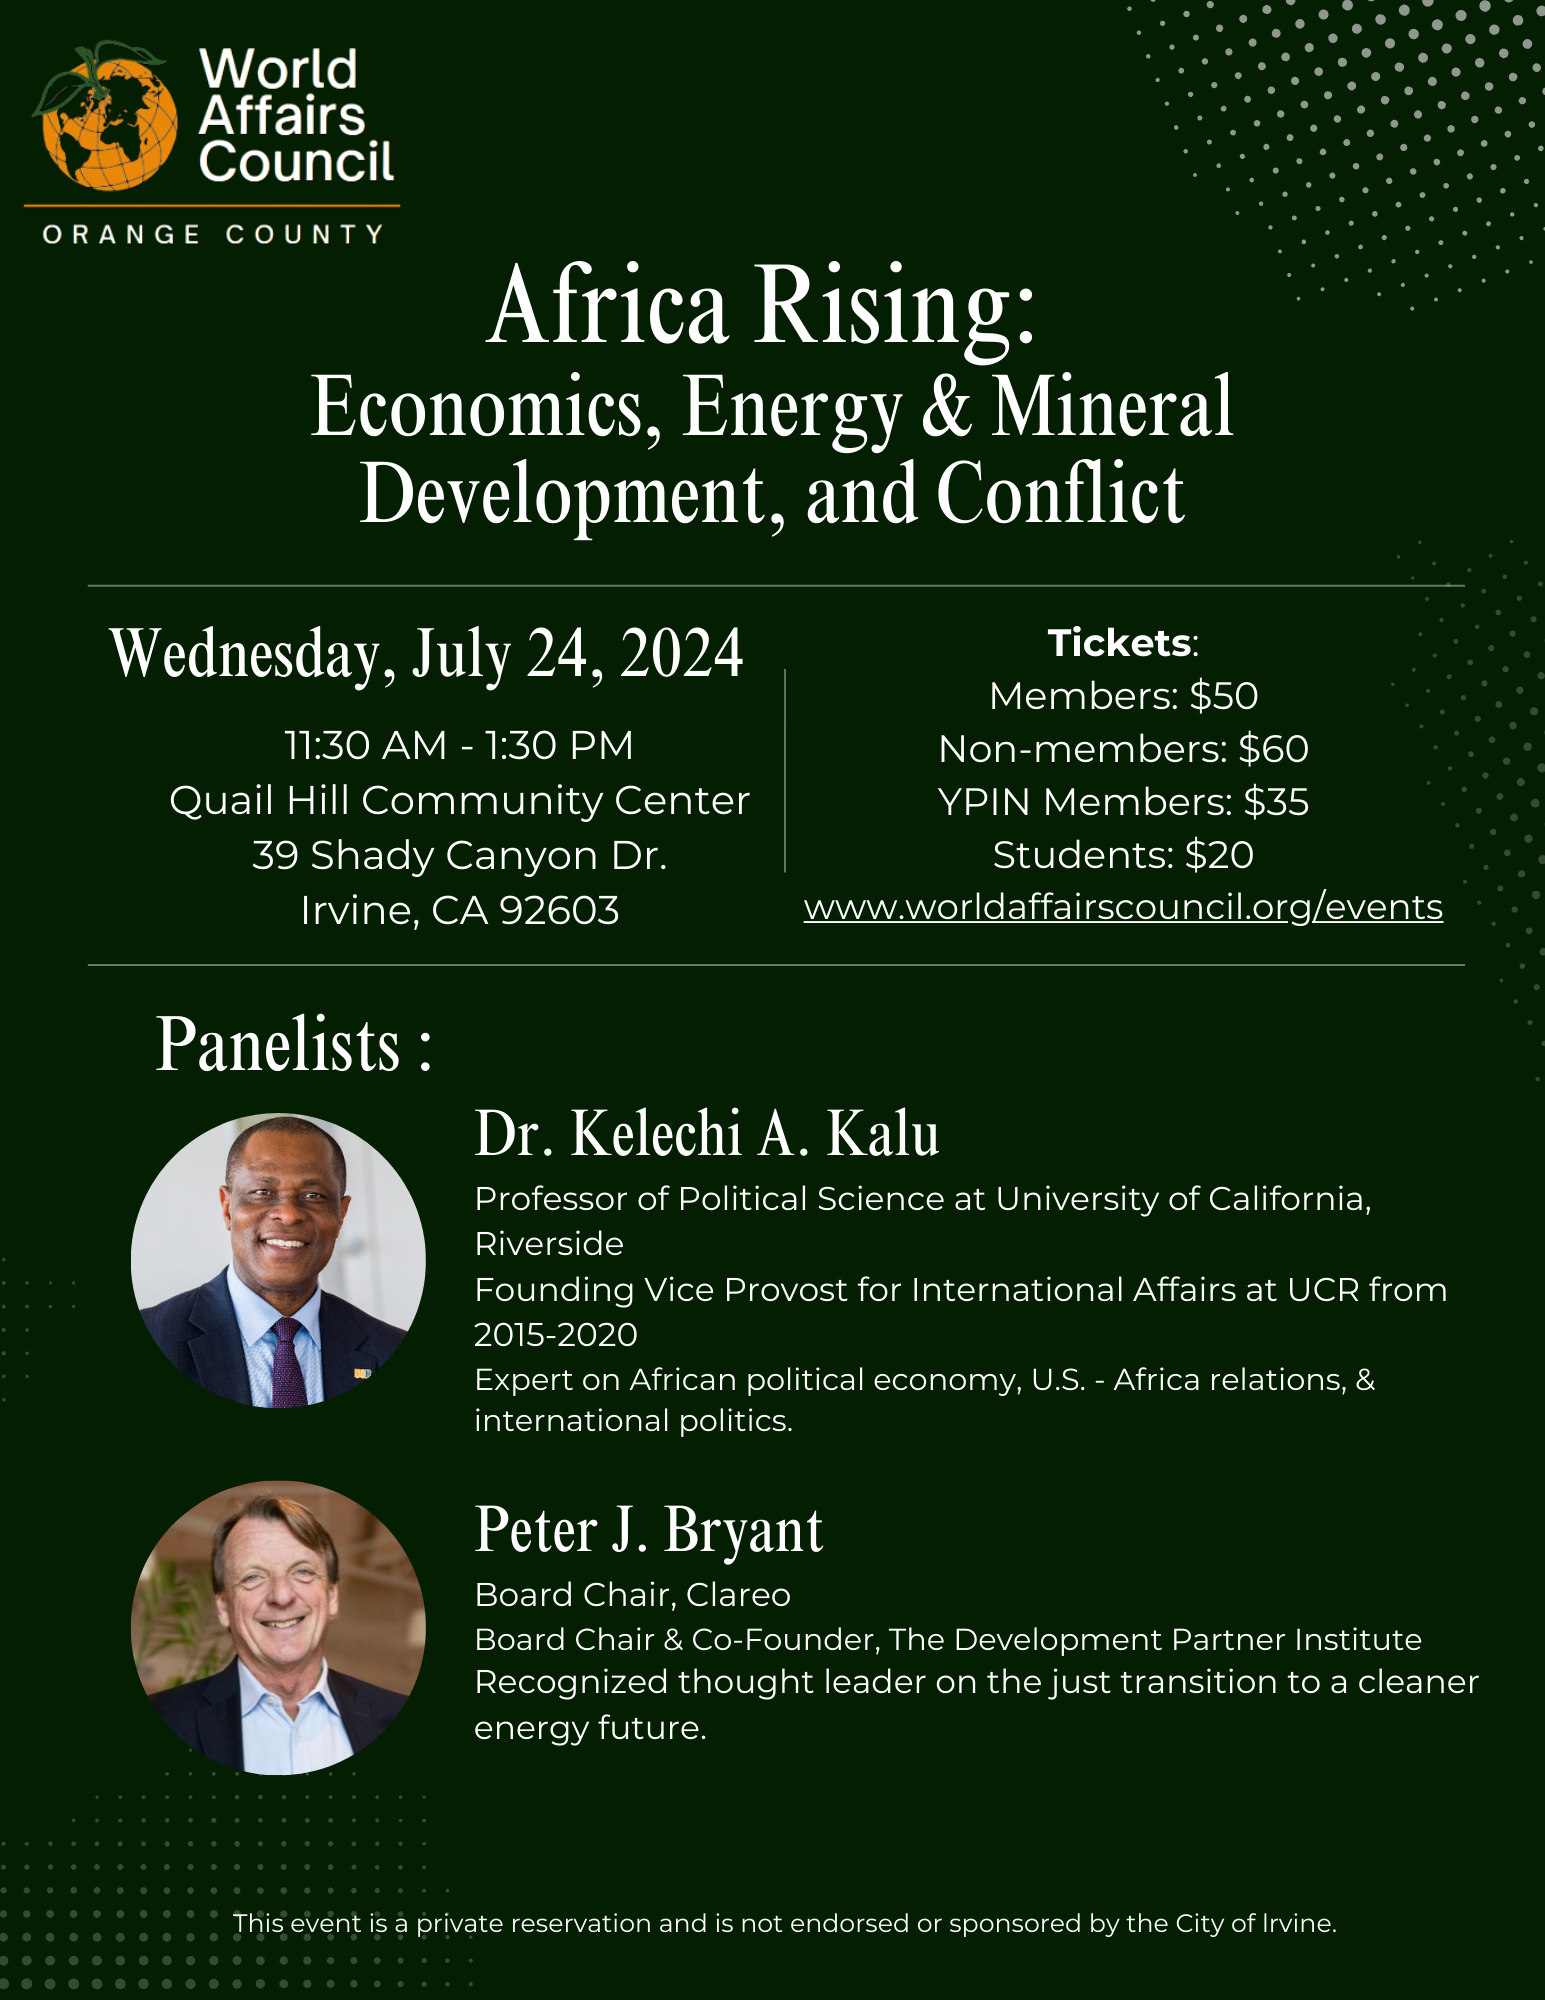 Africa Rising: Economics, Energy & Mineral Development, and Conflict